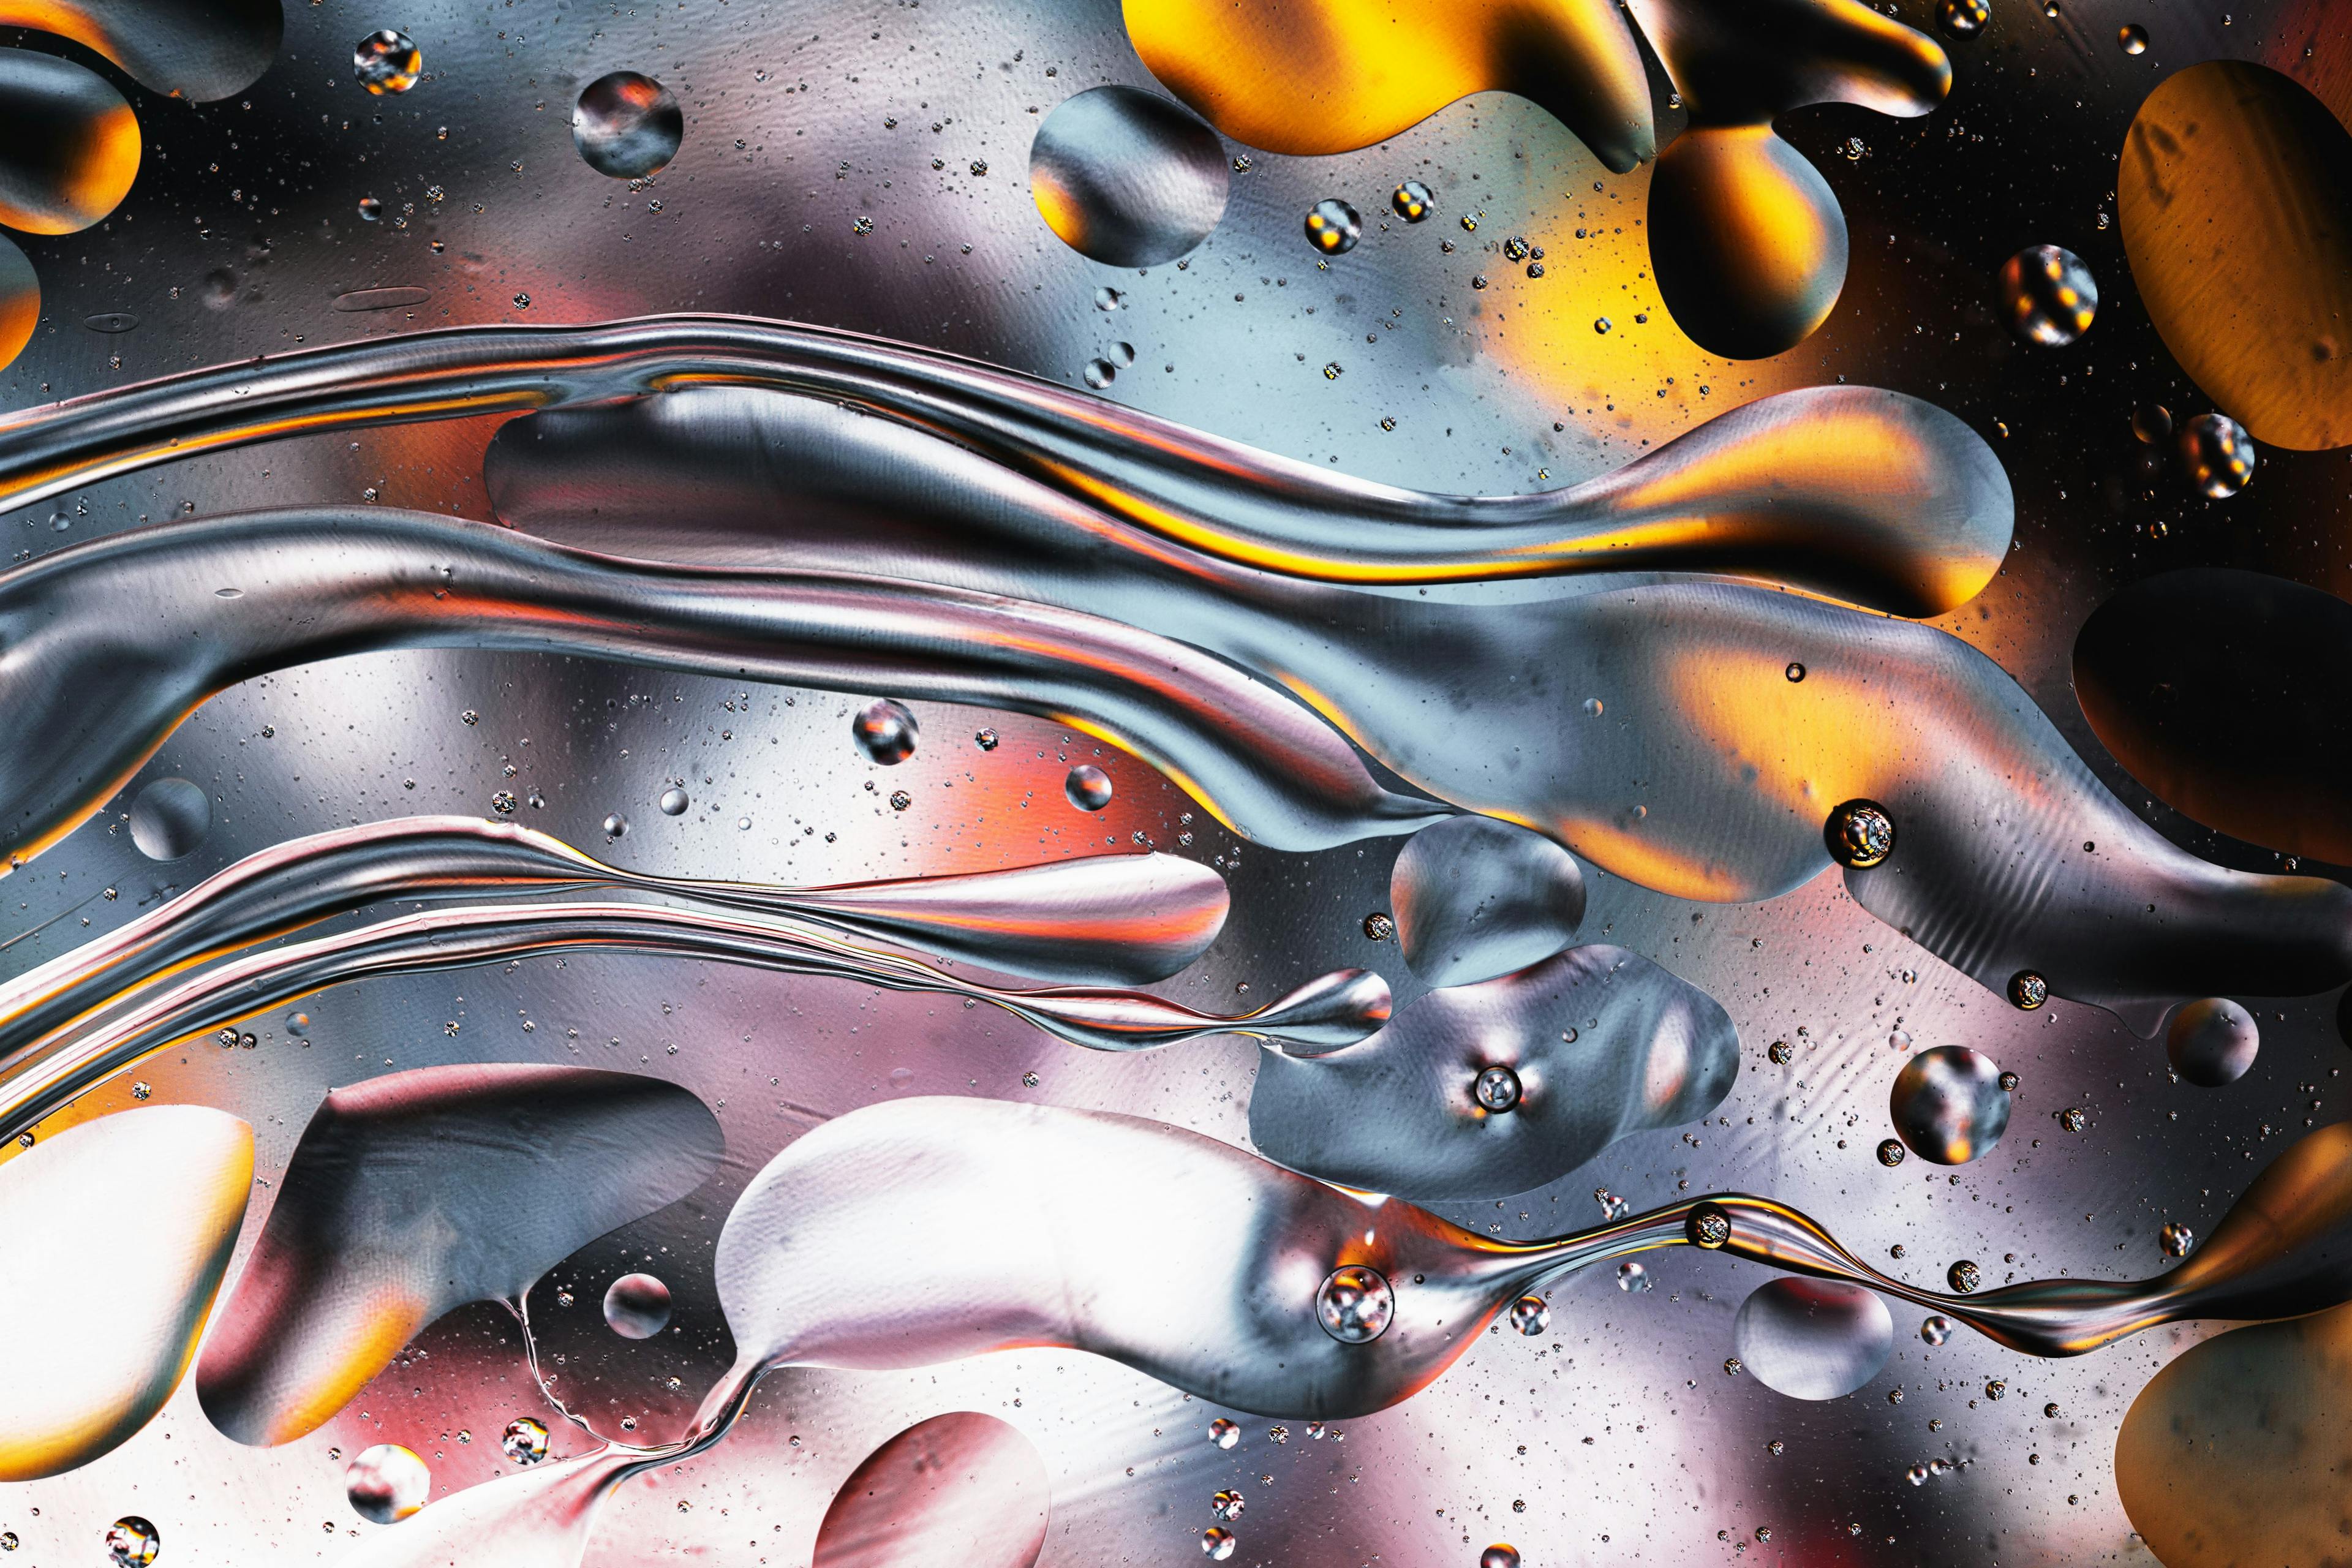 Abstract liquid colorful textured pattern background | Image Credit: © photopsist - stock.adobe.com